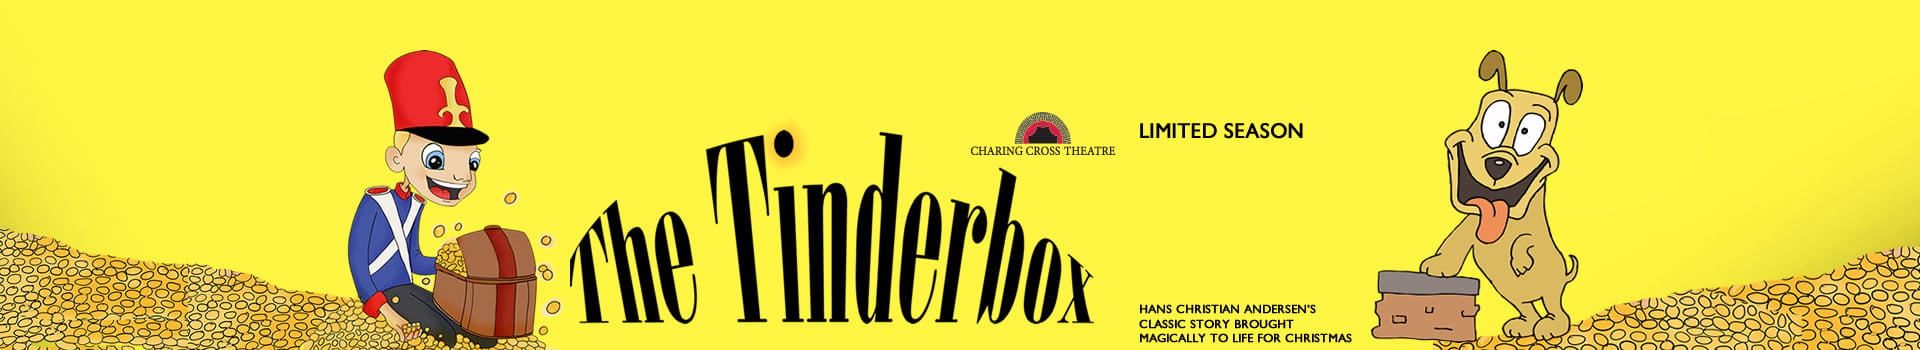 The Tinderbox tickets London Charing Cross Theatre